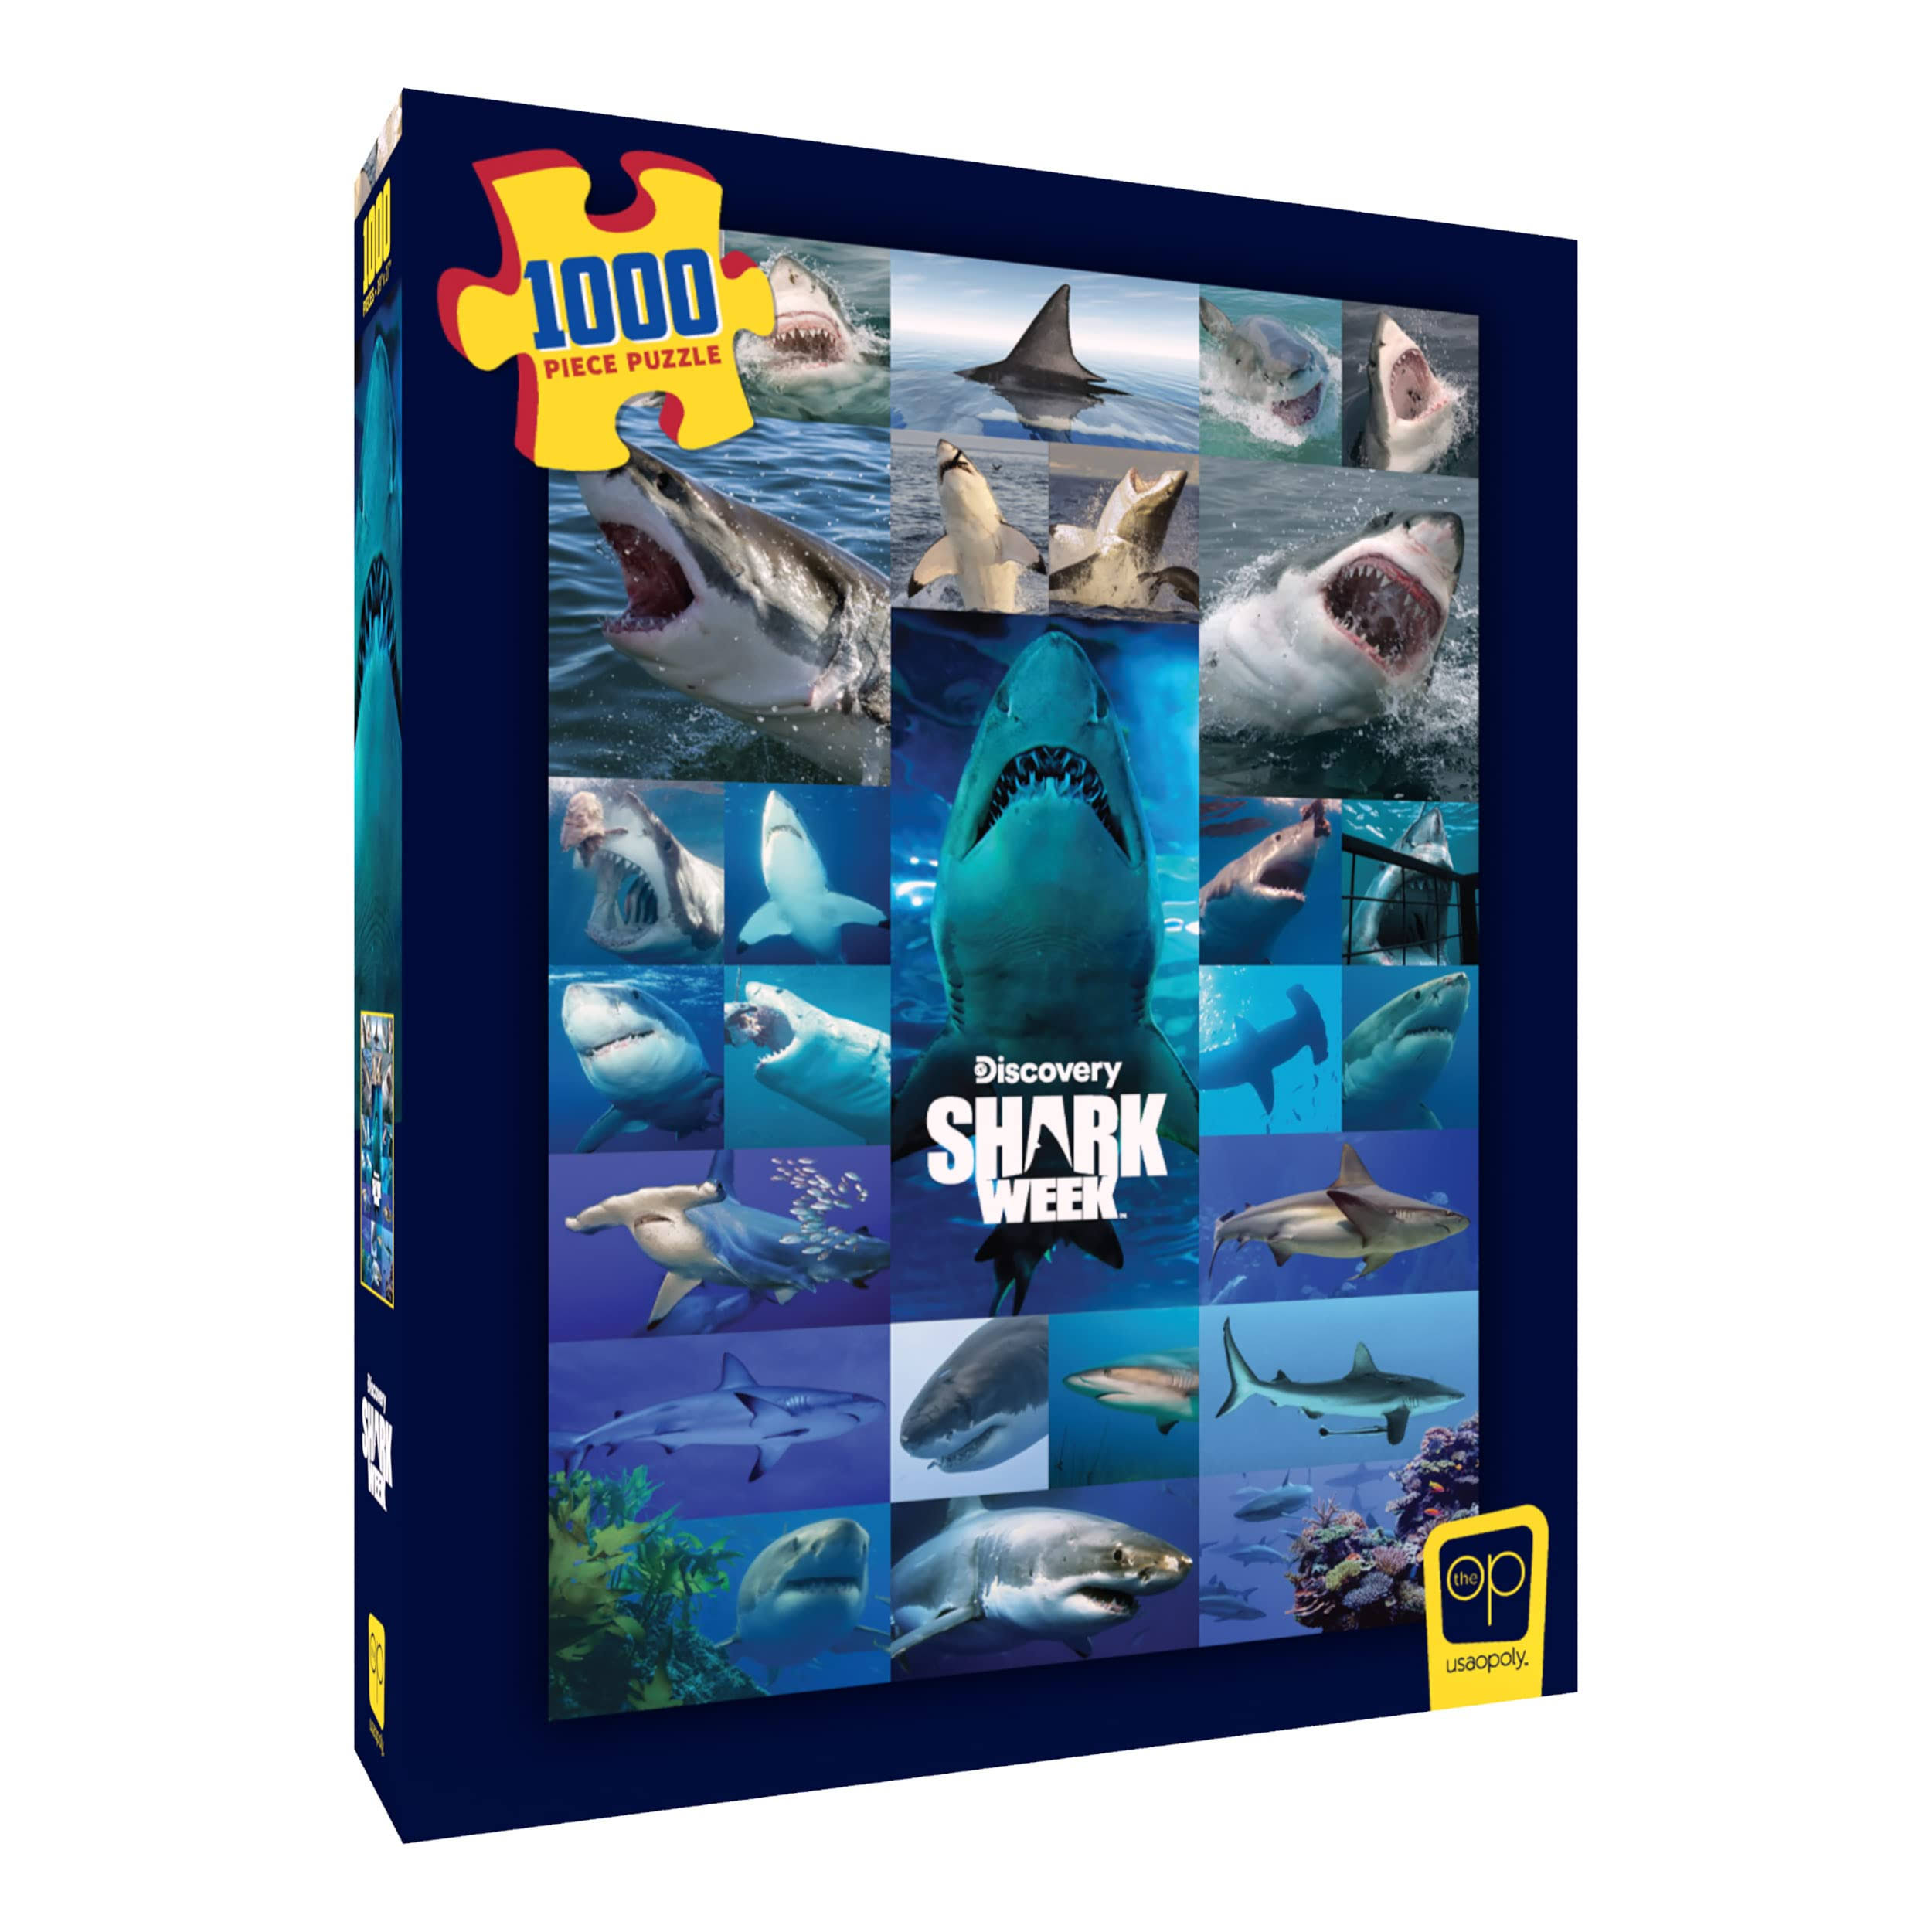 USAopoly Shark Week “Shiver of Sharks” 1000 Piece 19"x27" Jigsaw Puzzle